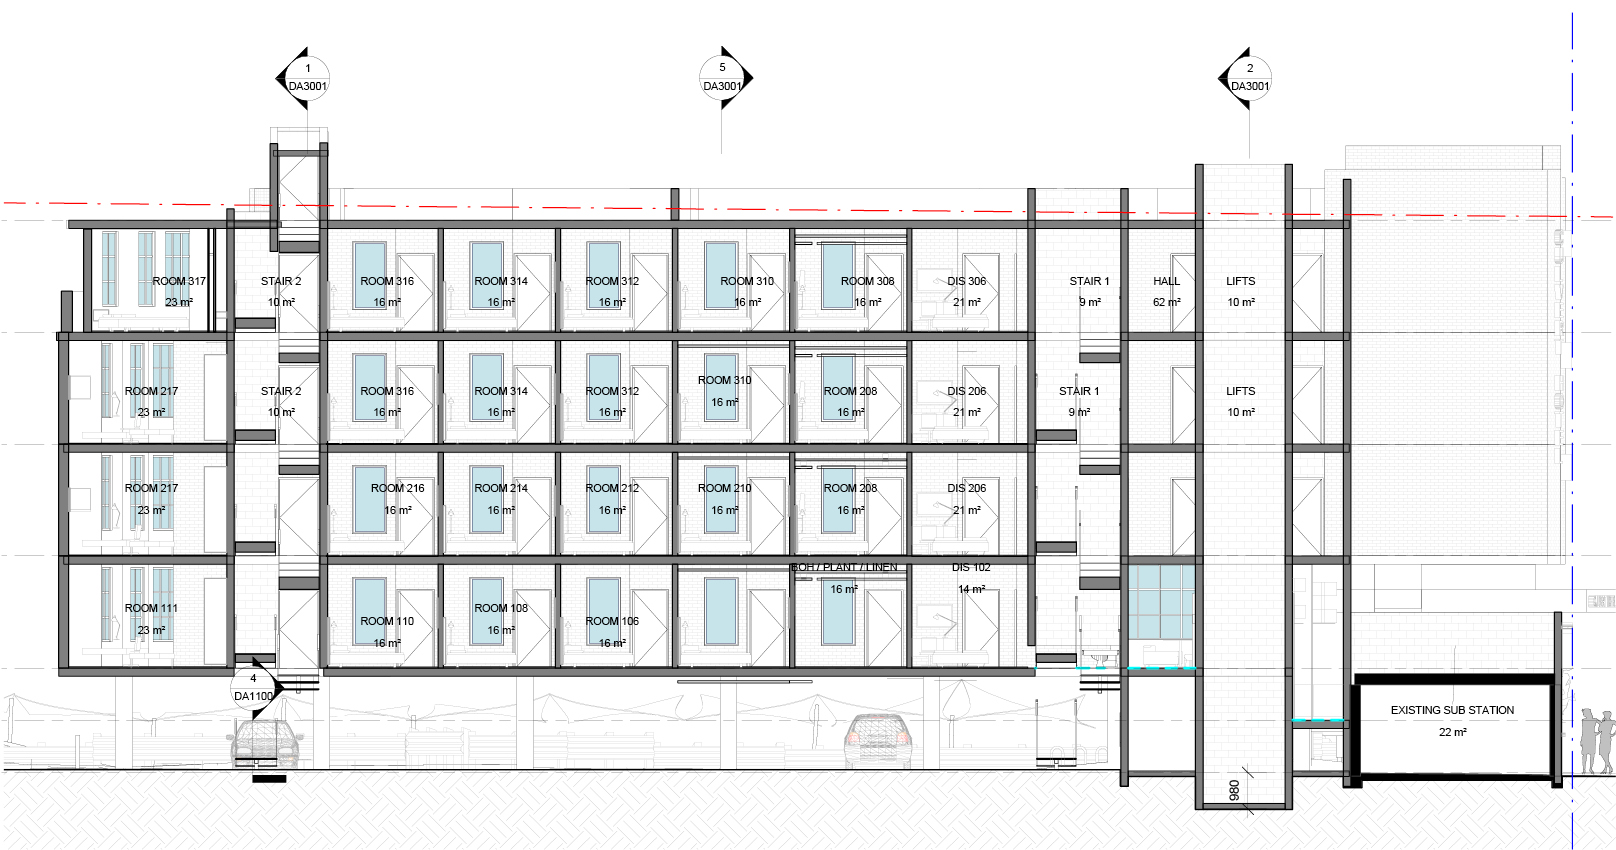 alt="sectional drawings of hotel"